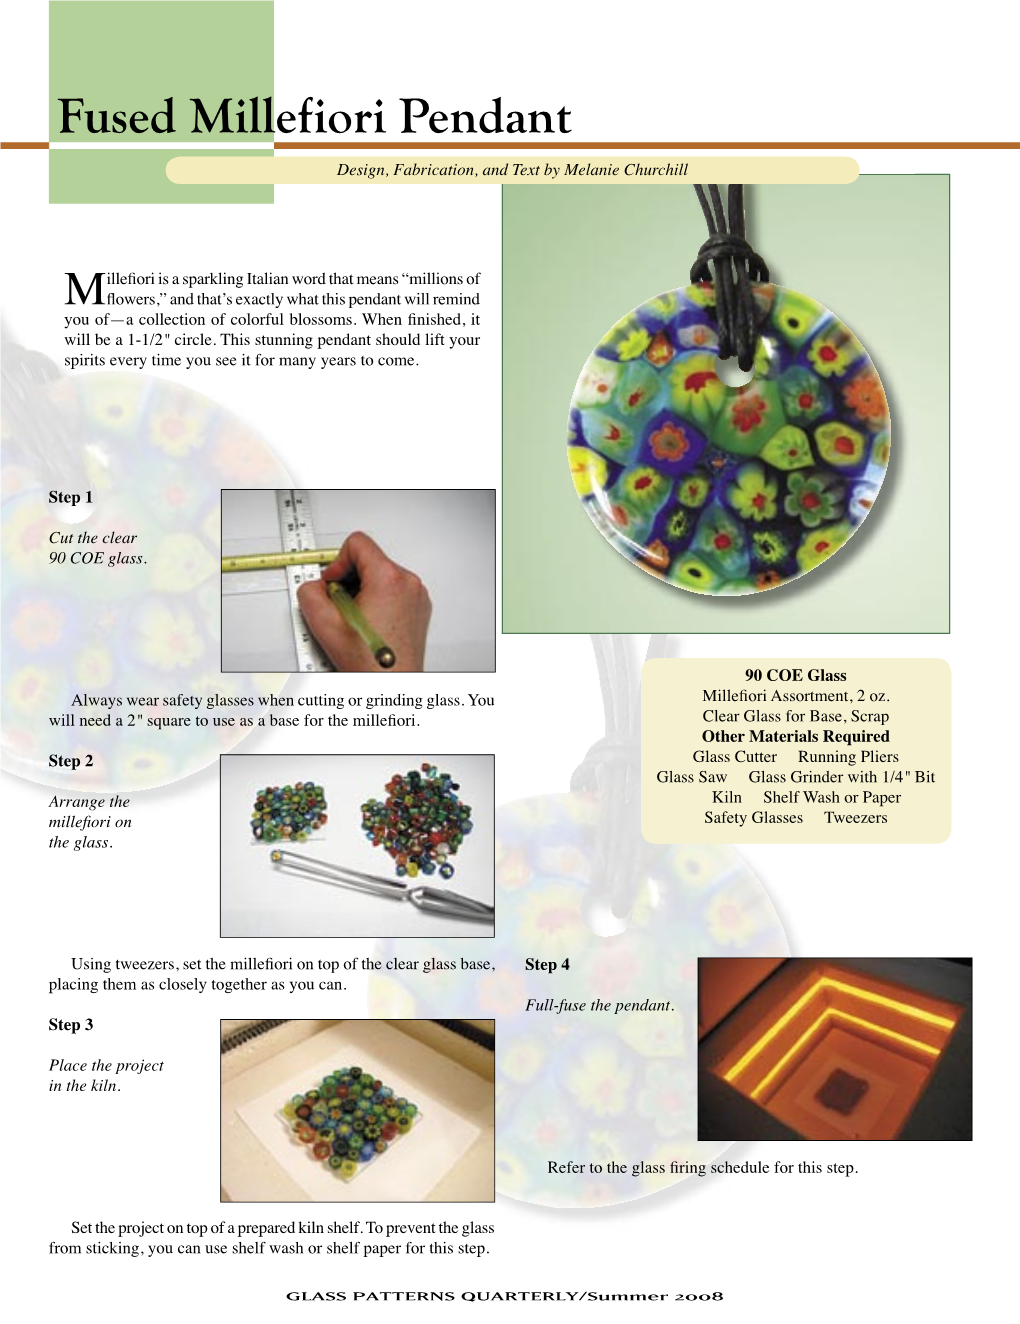 Fused Millefiori Pendant Design, Fabrication, and Text by Melanie Churchill